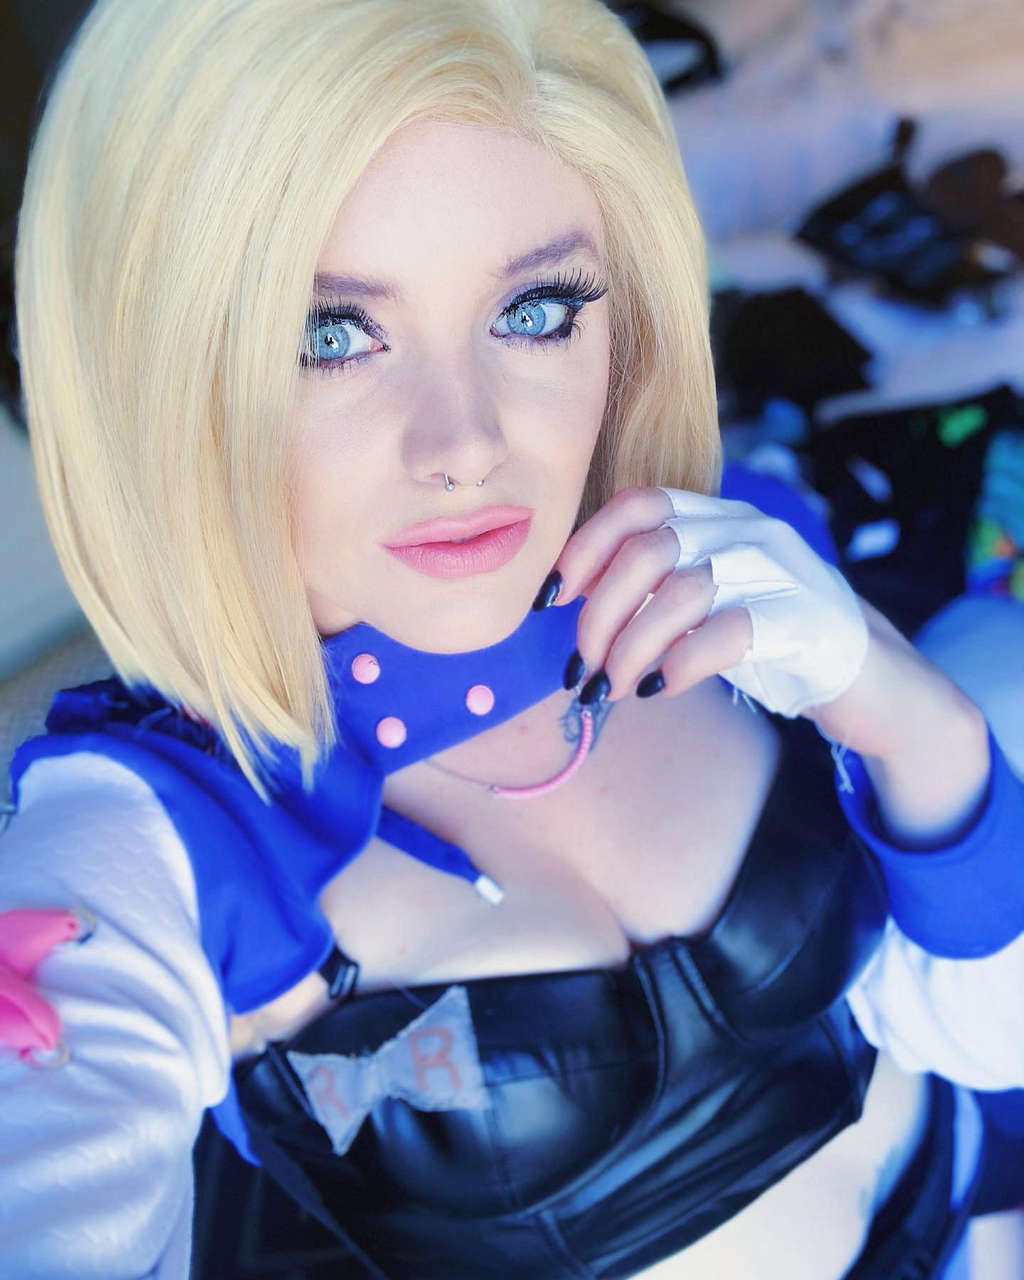 Cyberpunk Android 18 Cosplay By Ohmysophi